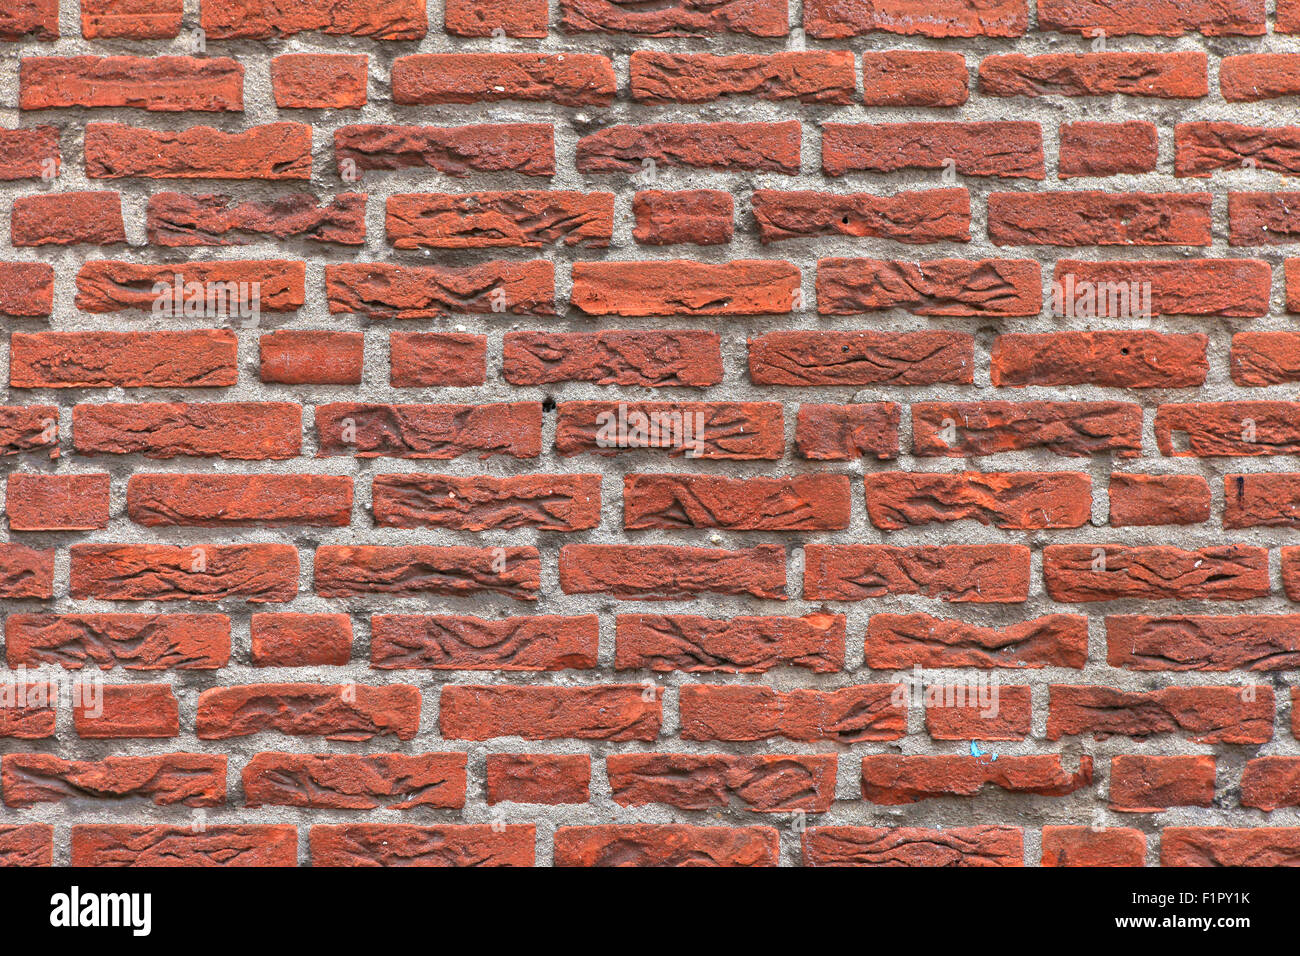 Old red brick wall Stock Photo